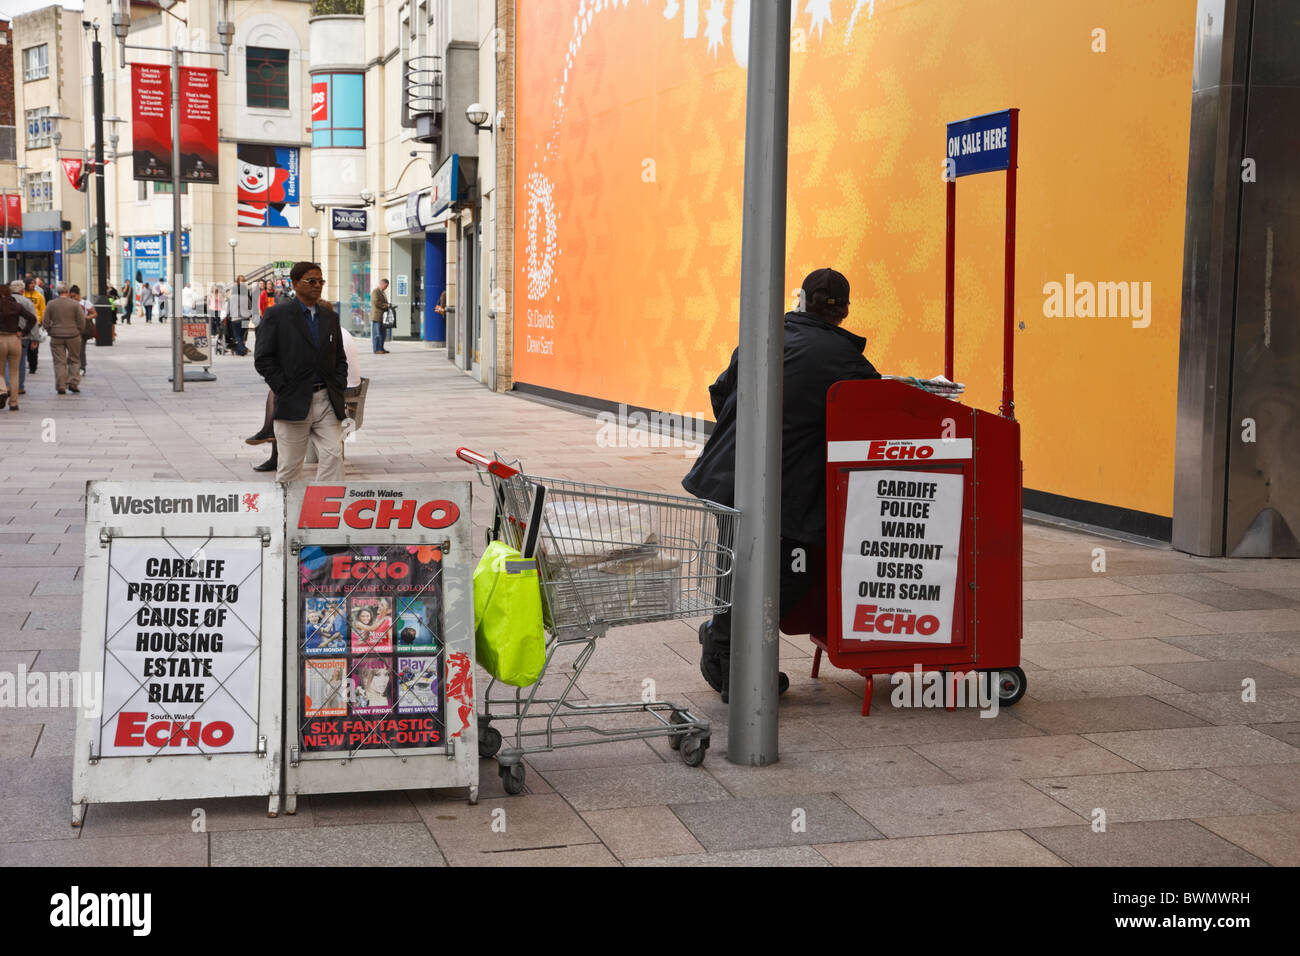 Street vender selling local newspapers from a newspaper stand in the city centre. Cardiff, Glamorgan, South Wales, UK Stock Photo